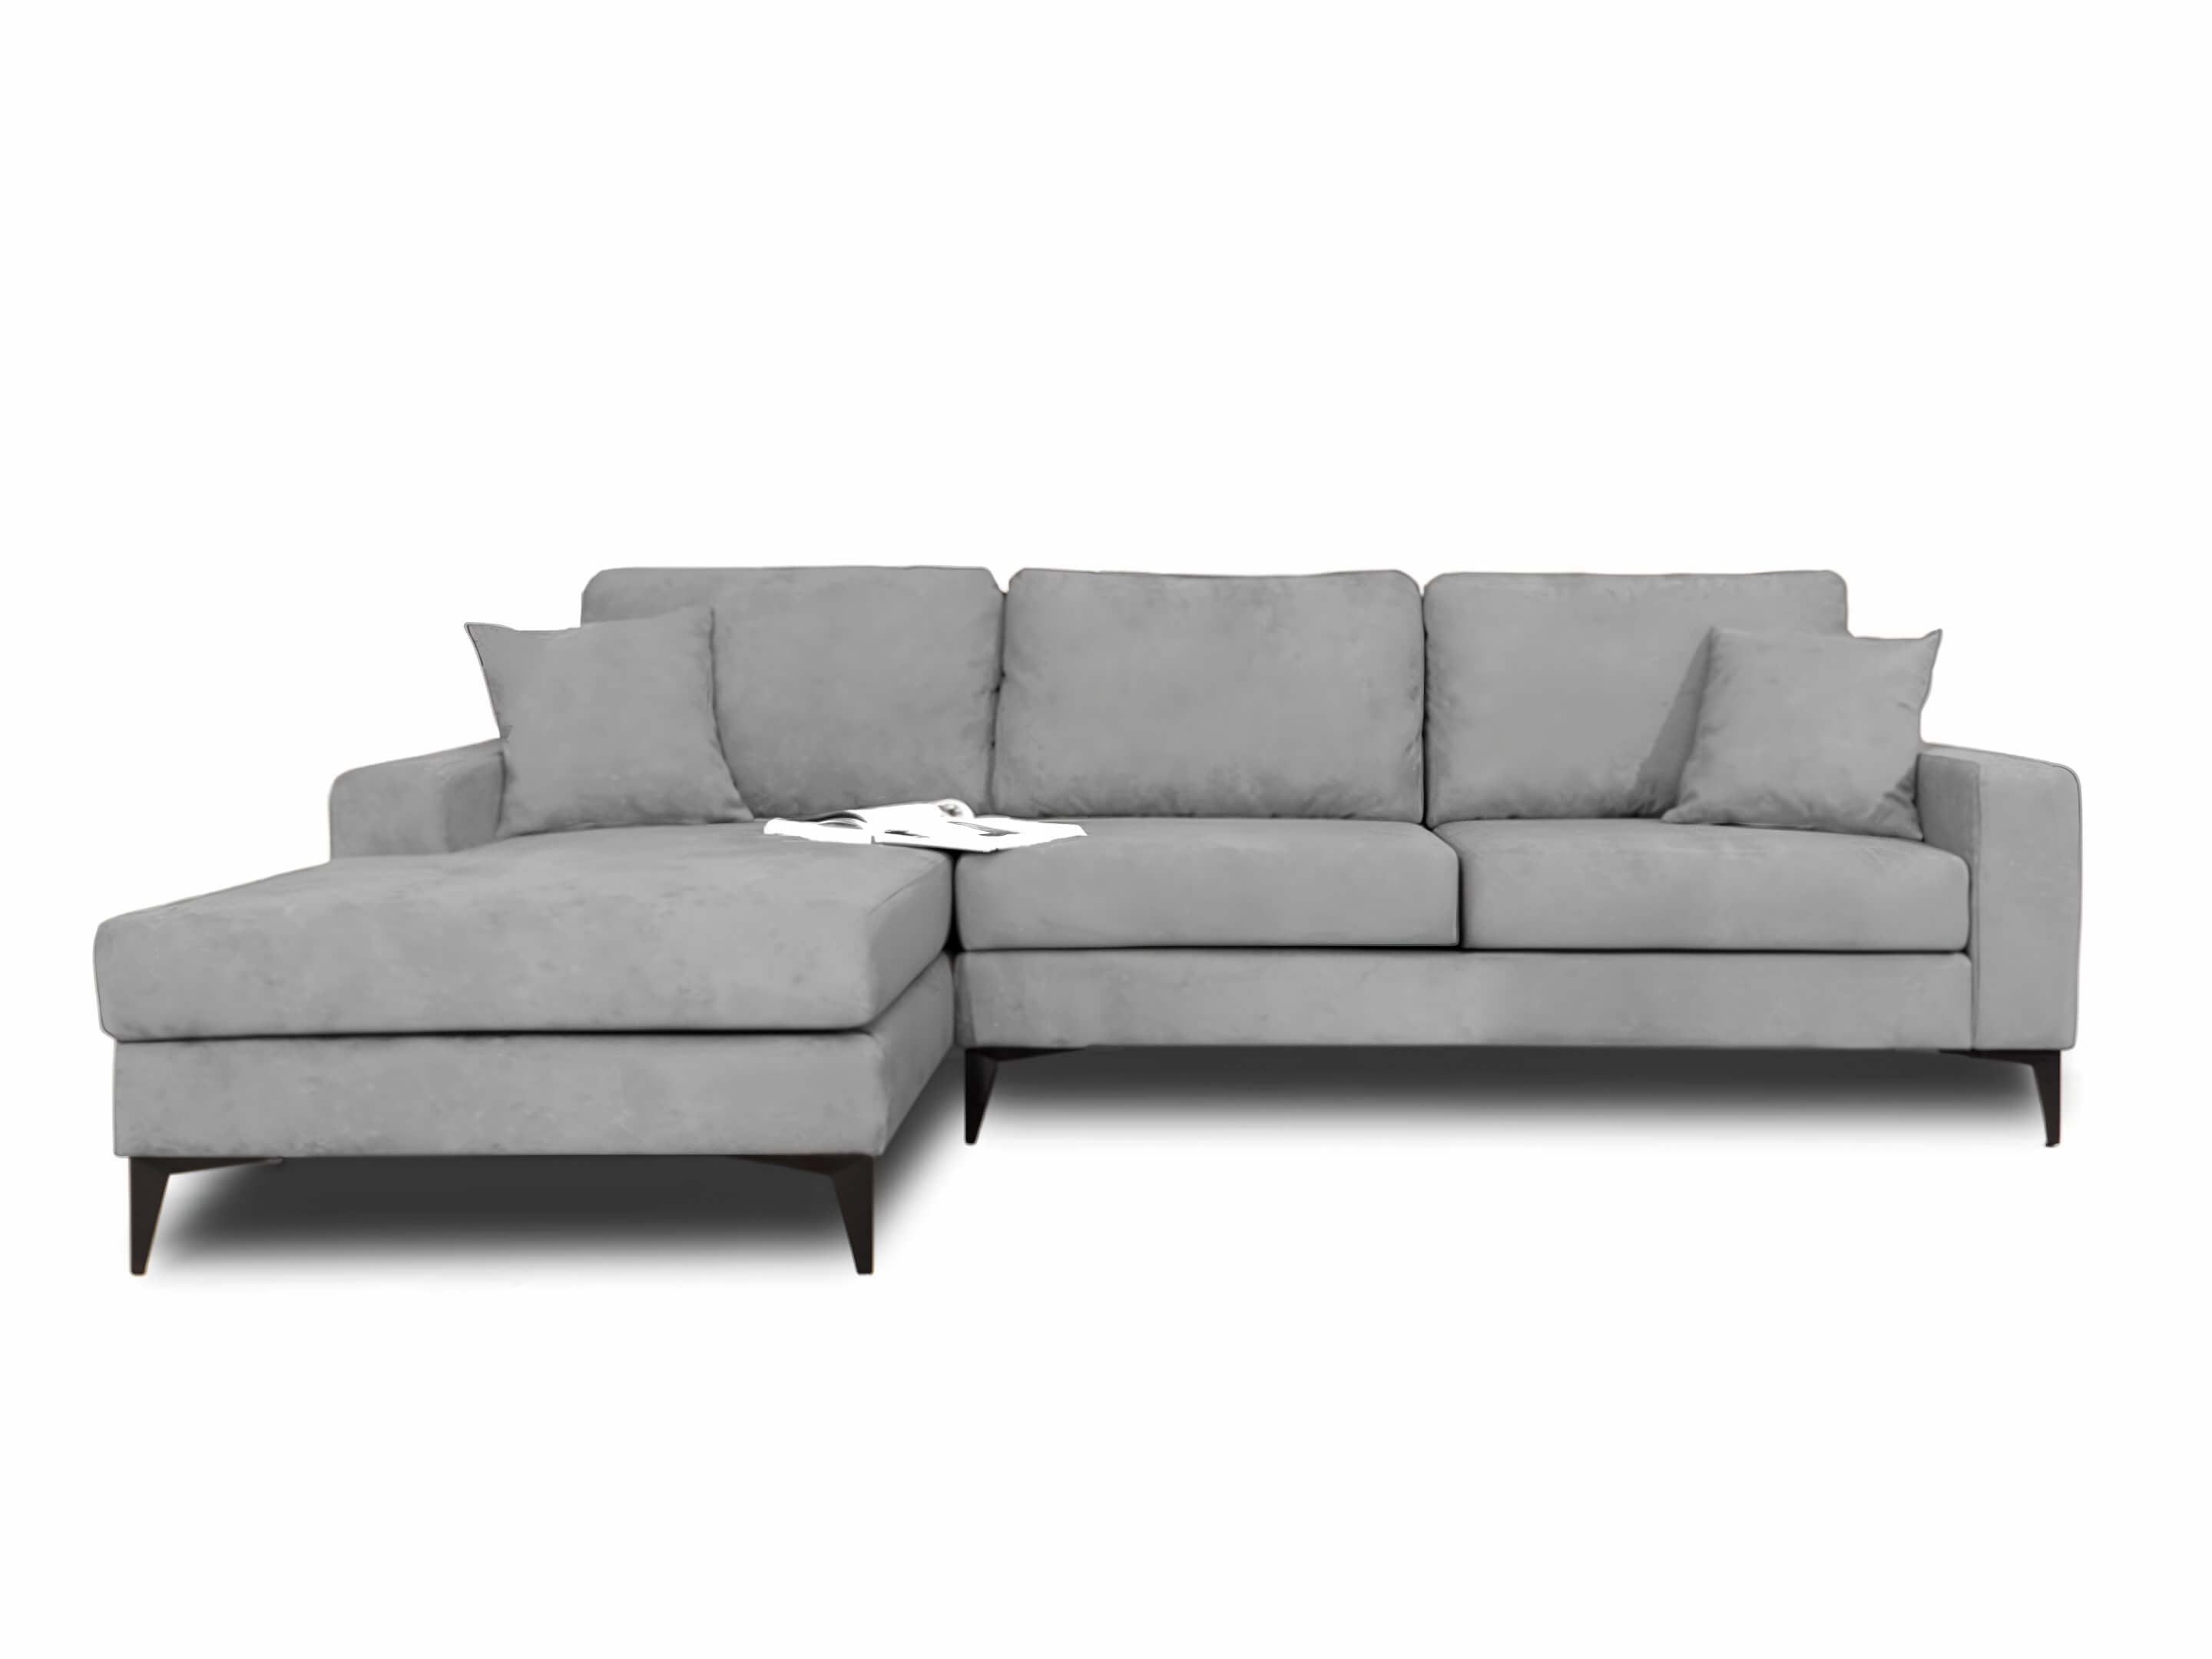 star corner sofa water and stain resistant fabric - Lux furniture